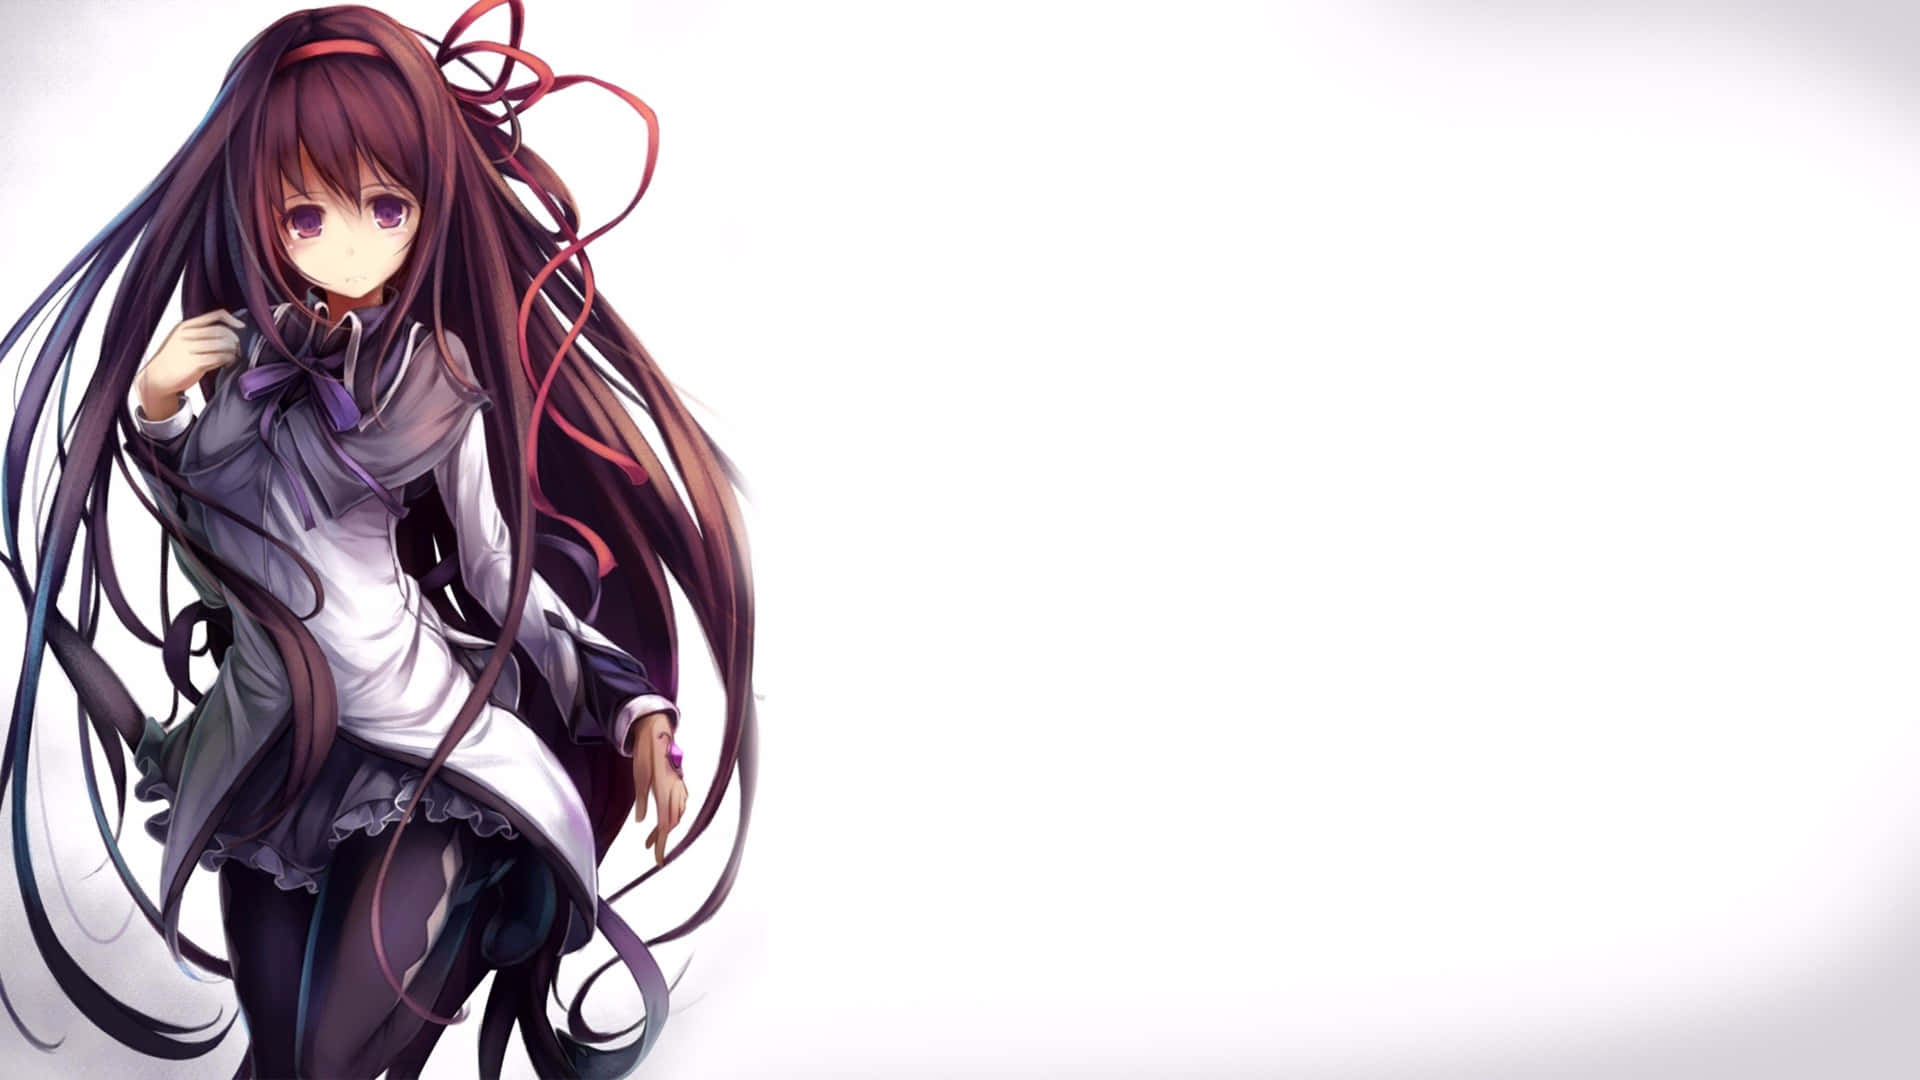 A Girl With Long Hair And A White Background Wallpaper